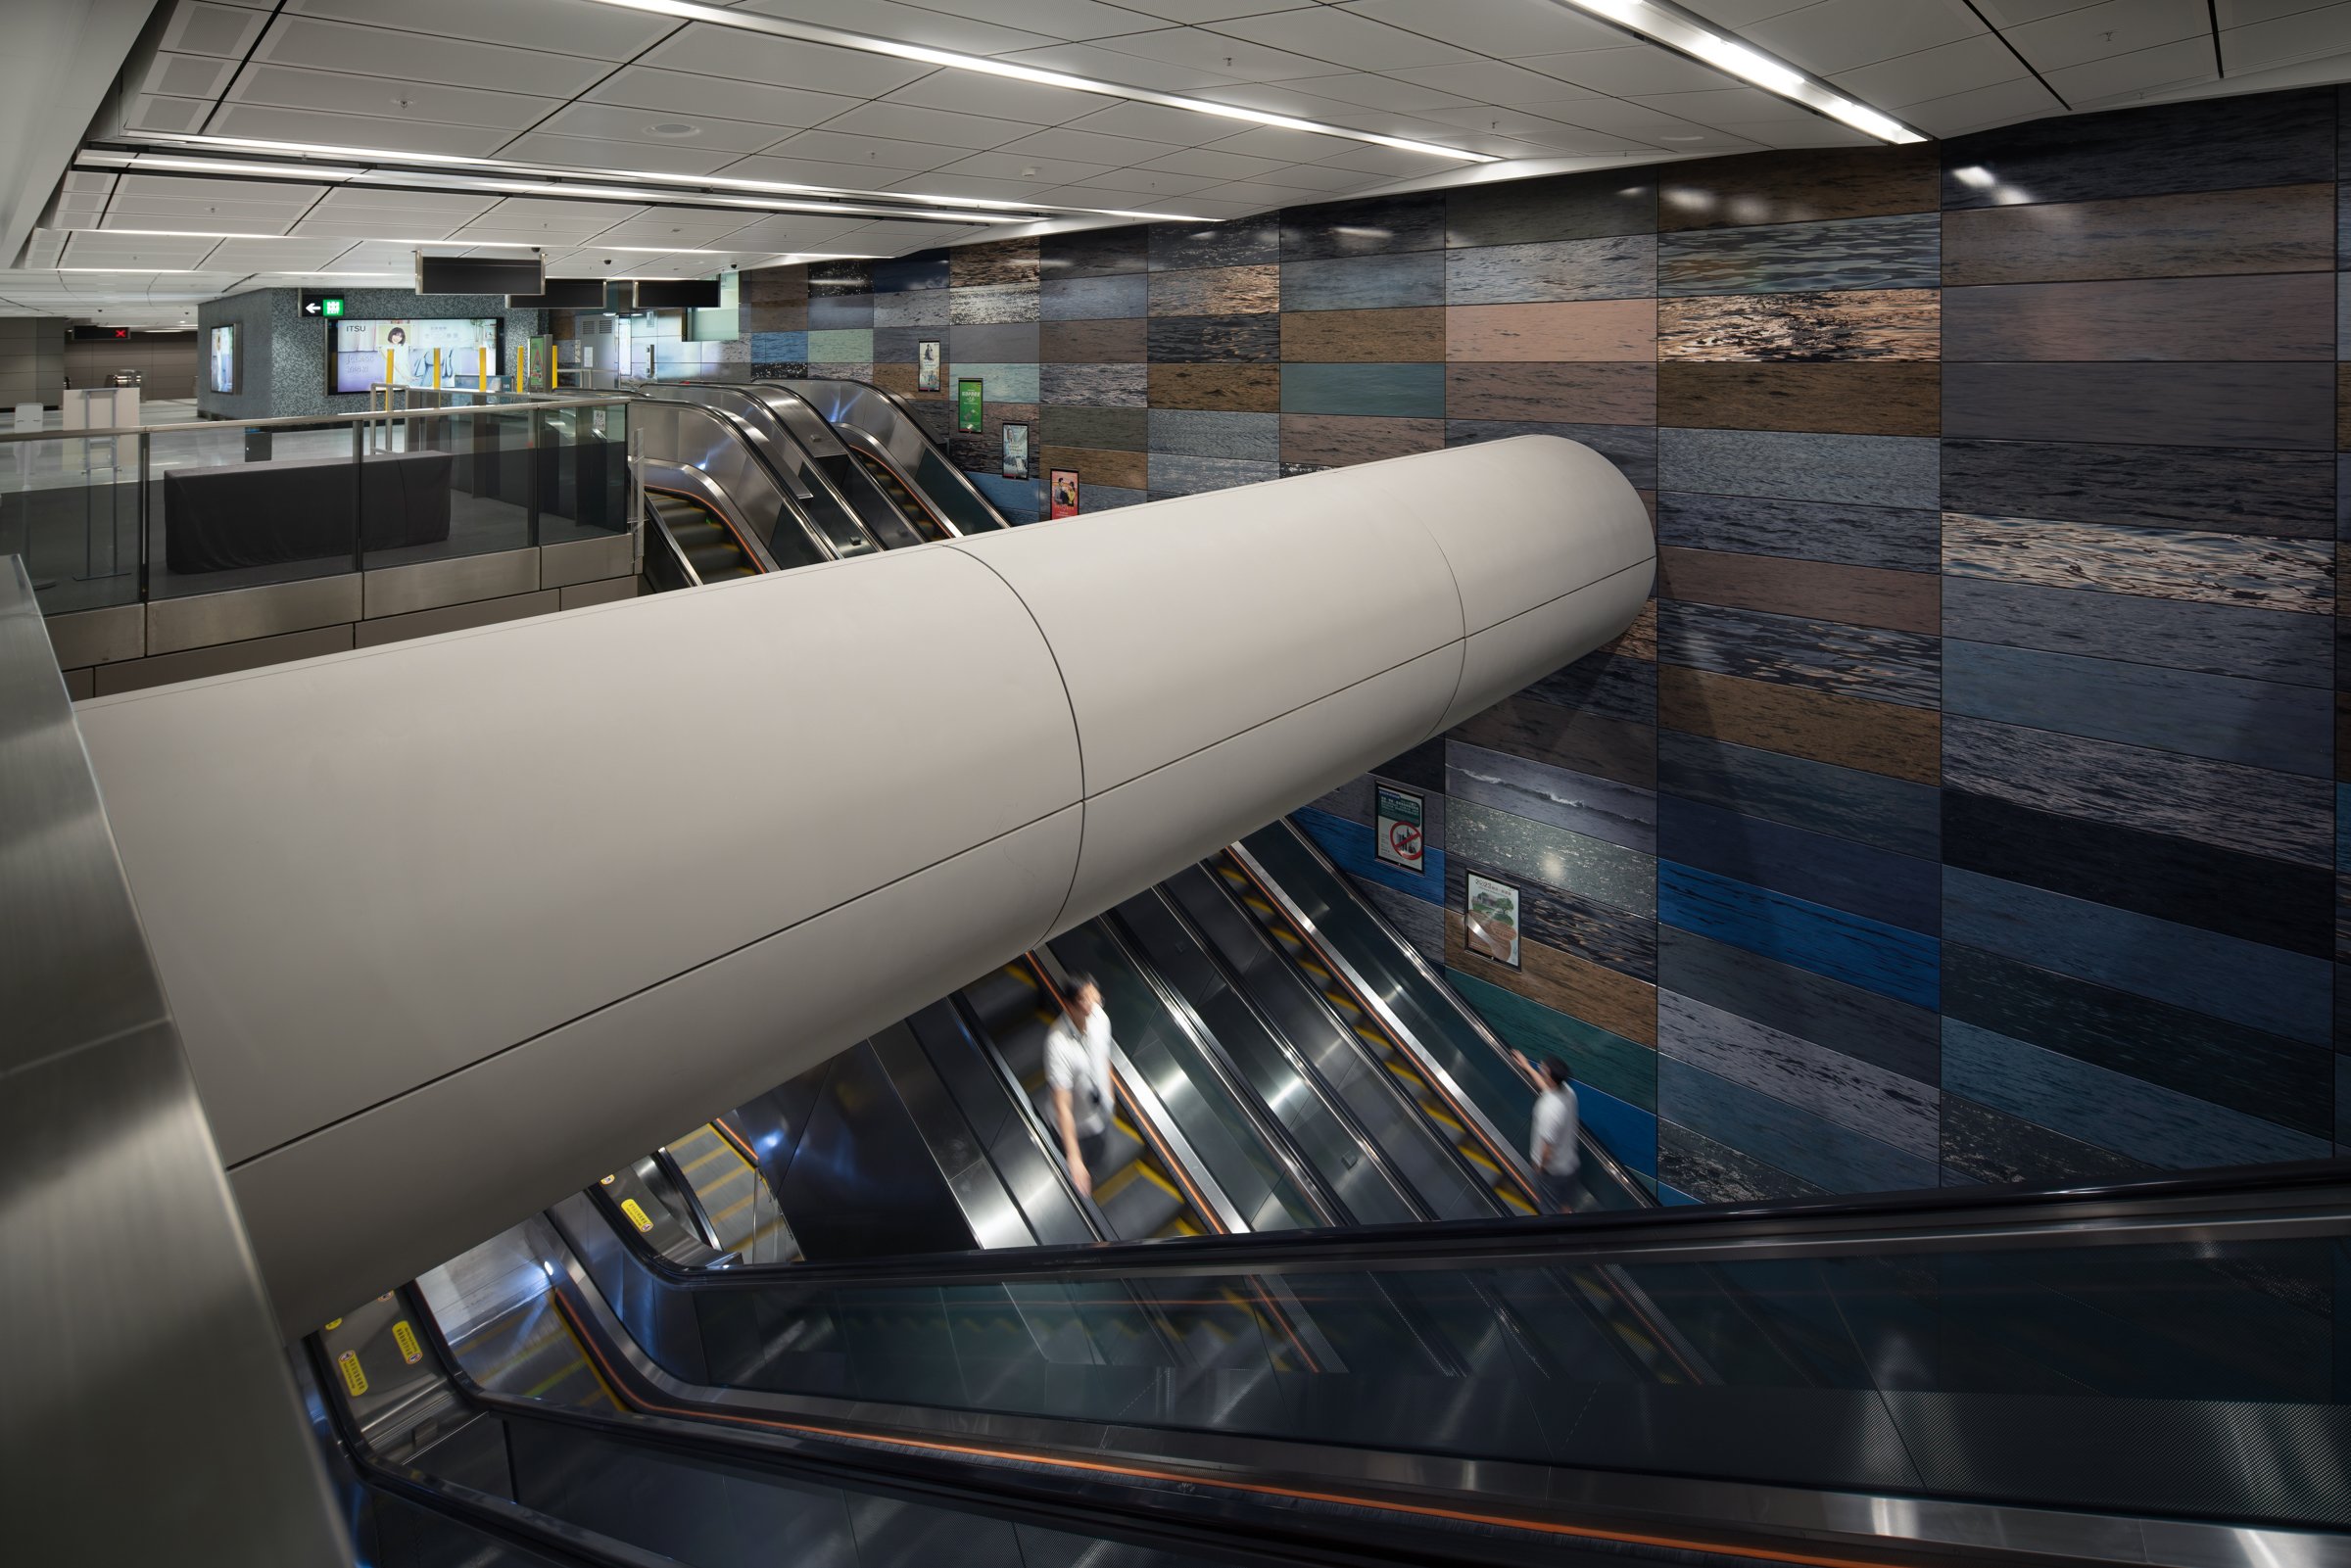  Exhibition Centre MTR Station East Rail Line  Designed by / Photographed for Farrells 